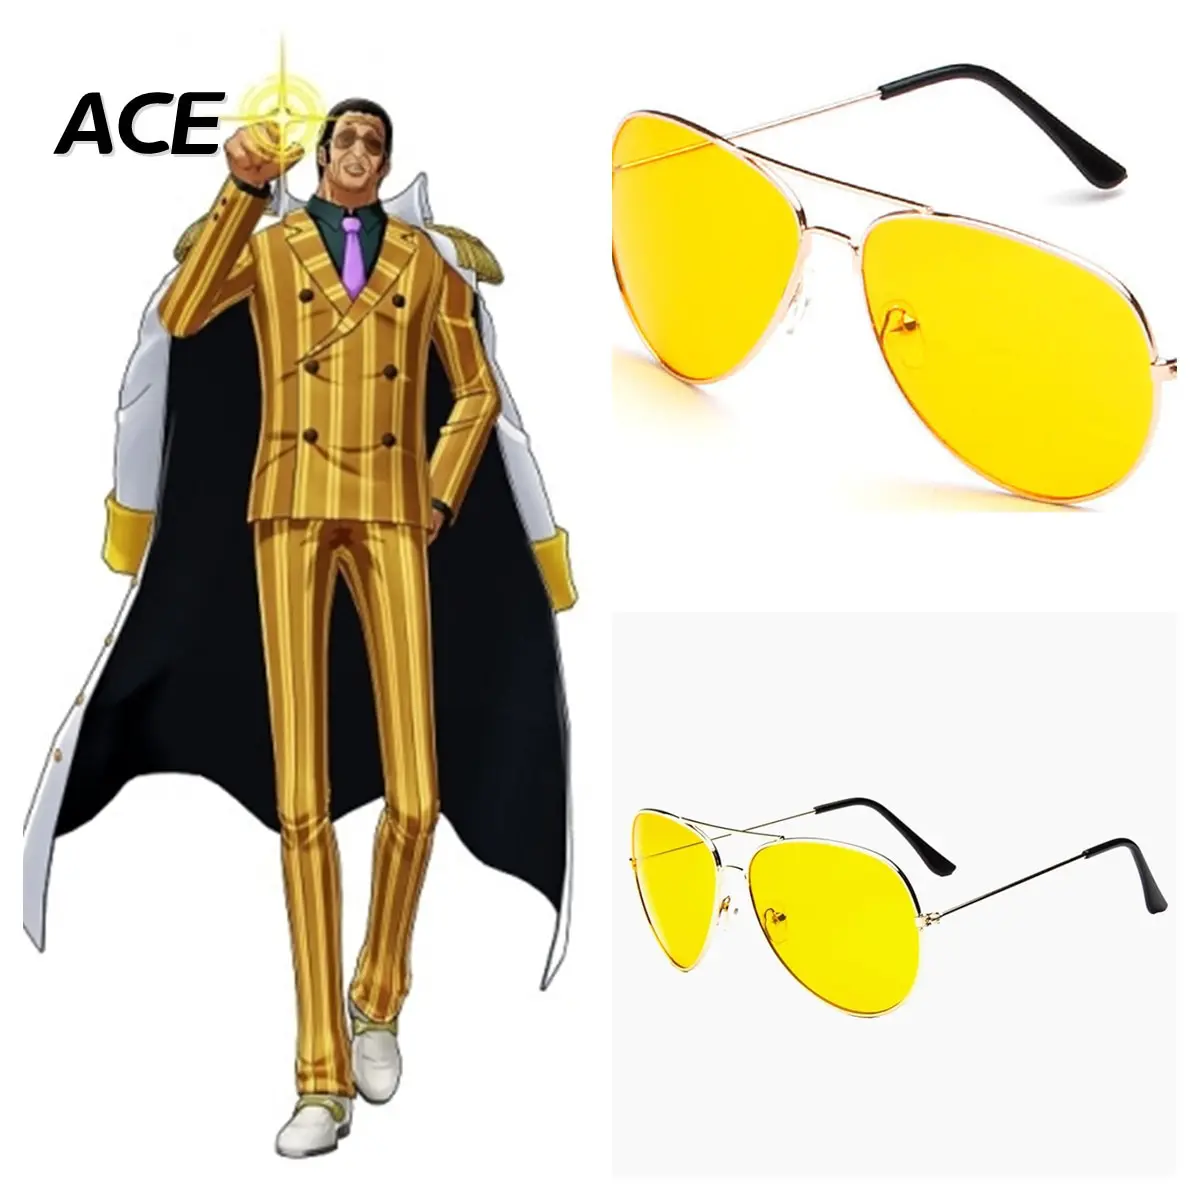 ACE Anime One Piece Characters Navy Admiral Borsalino Cosplay glasses Yellow Sunglasses Uncategorized